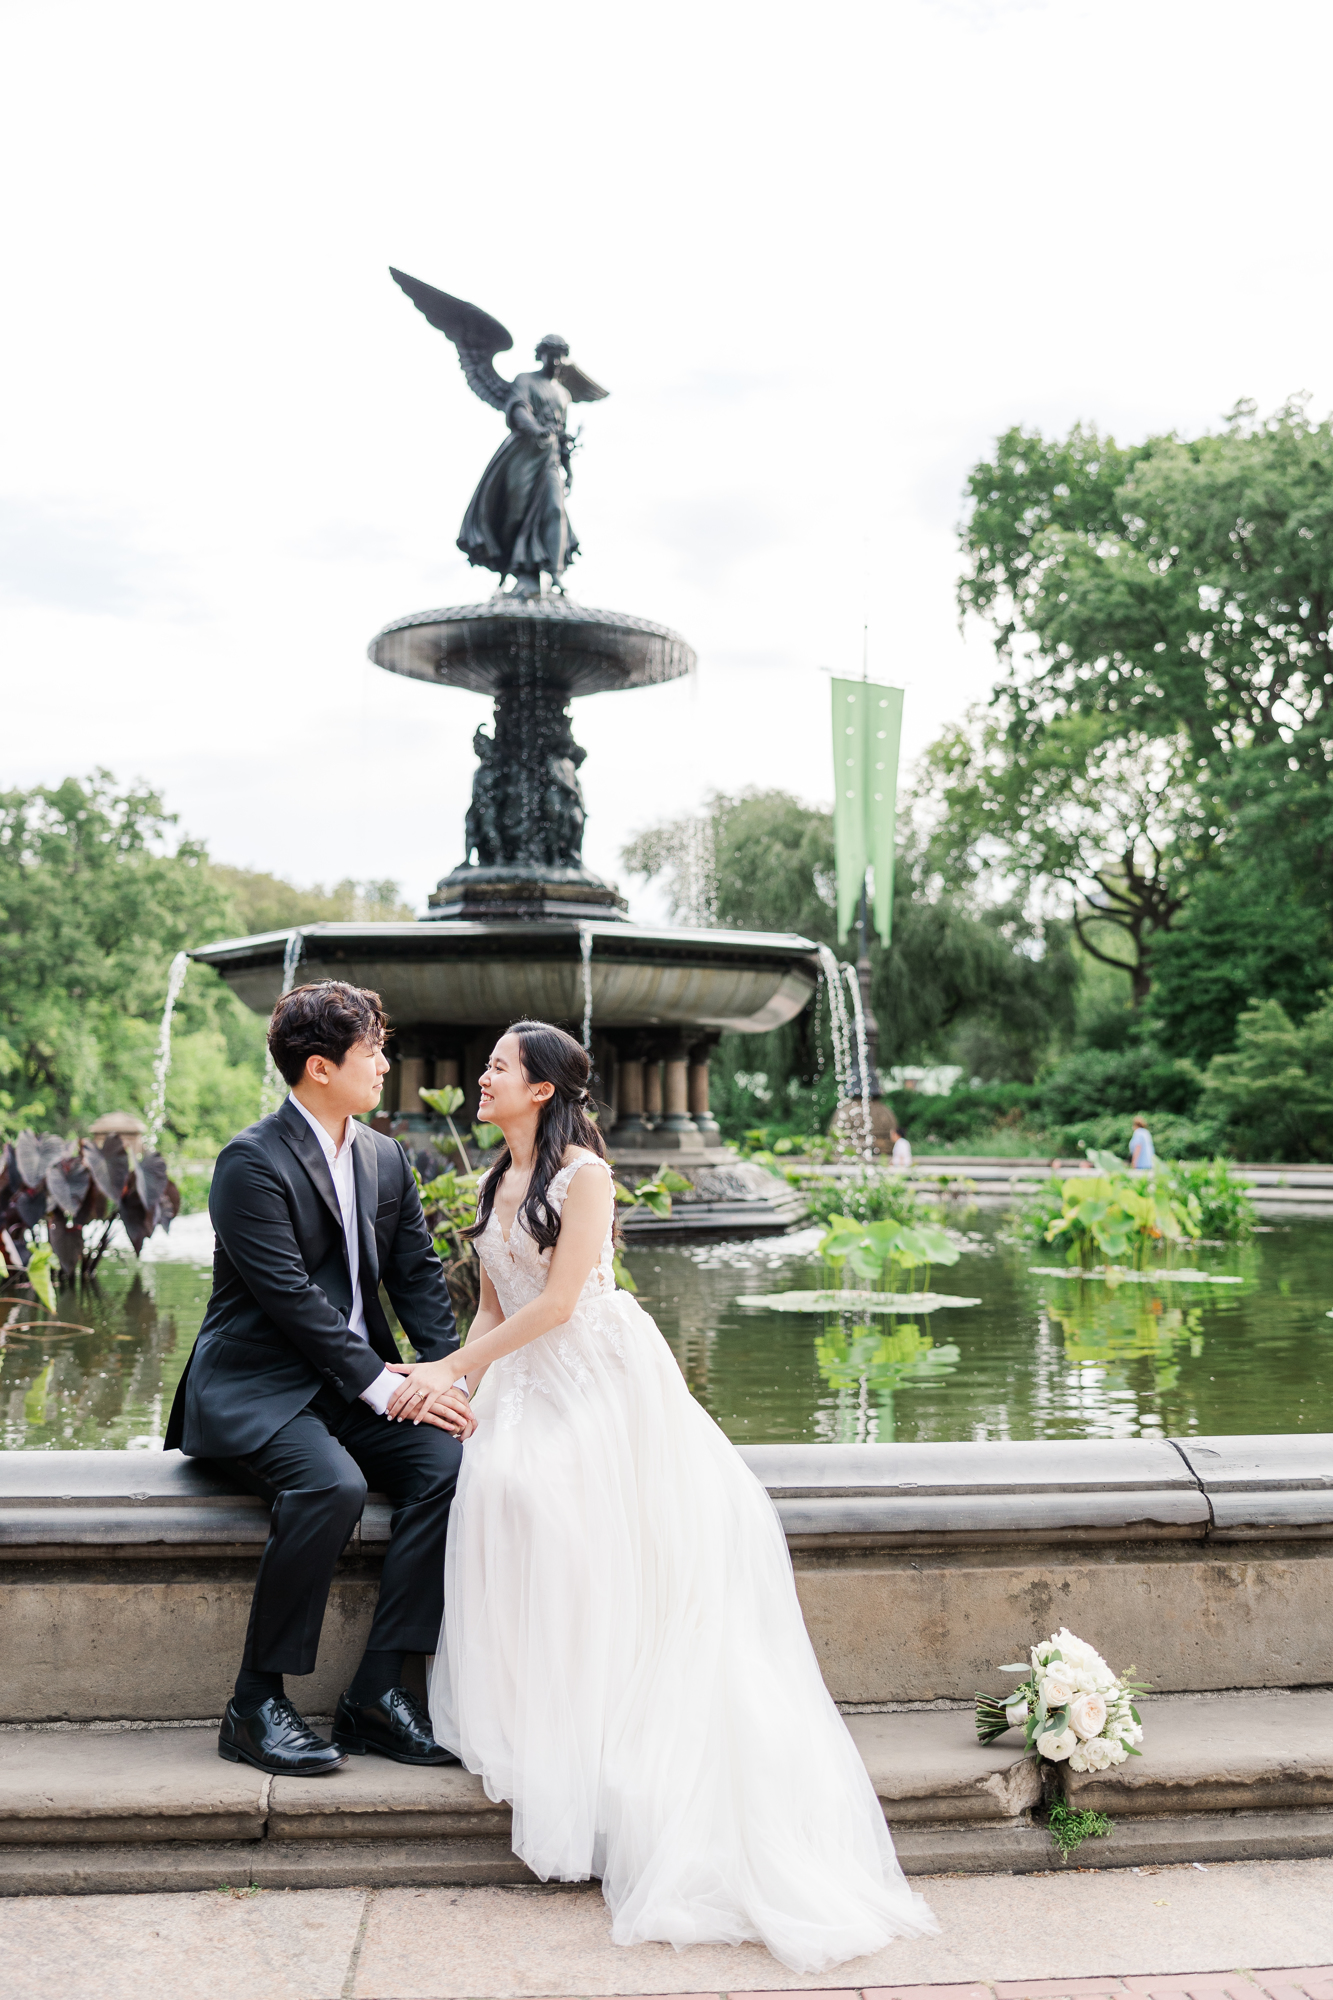 Gorgeous Summer Morning Elopement Photos in Central Park New York